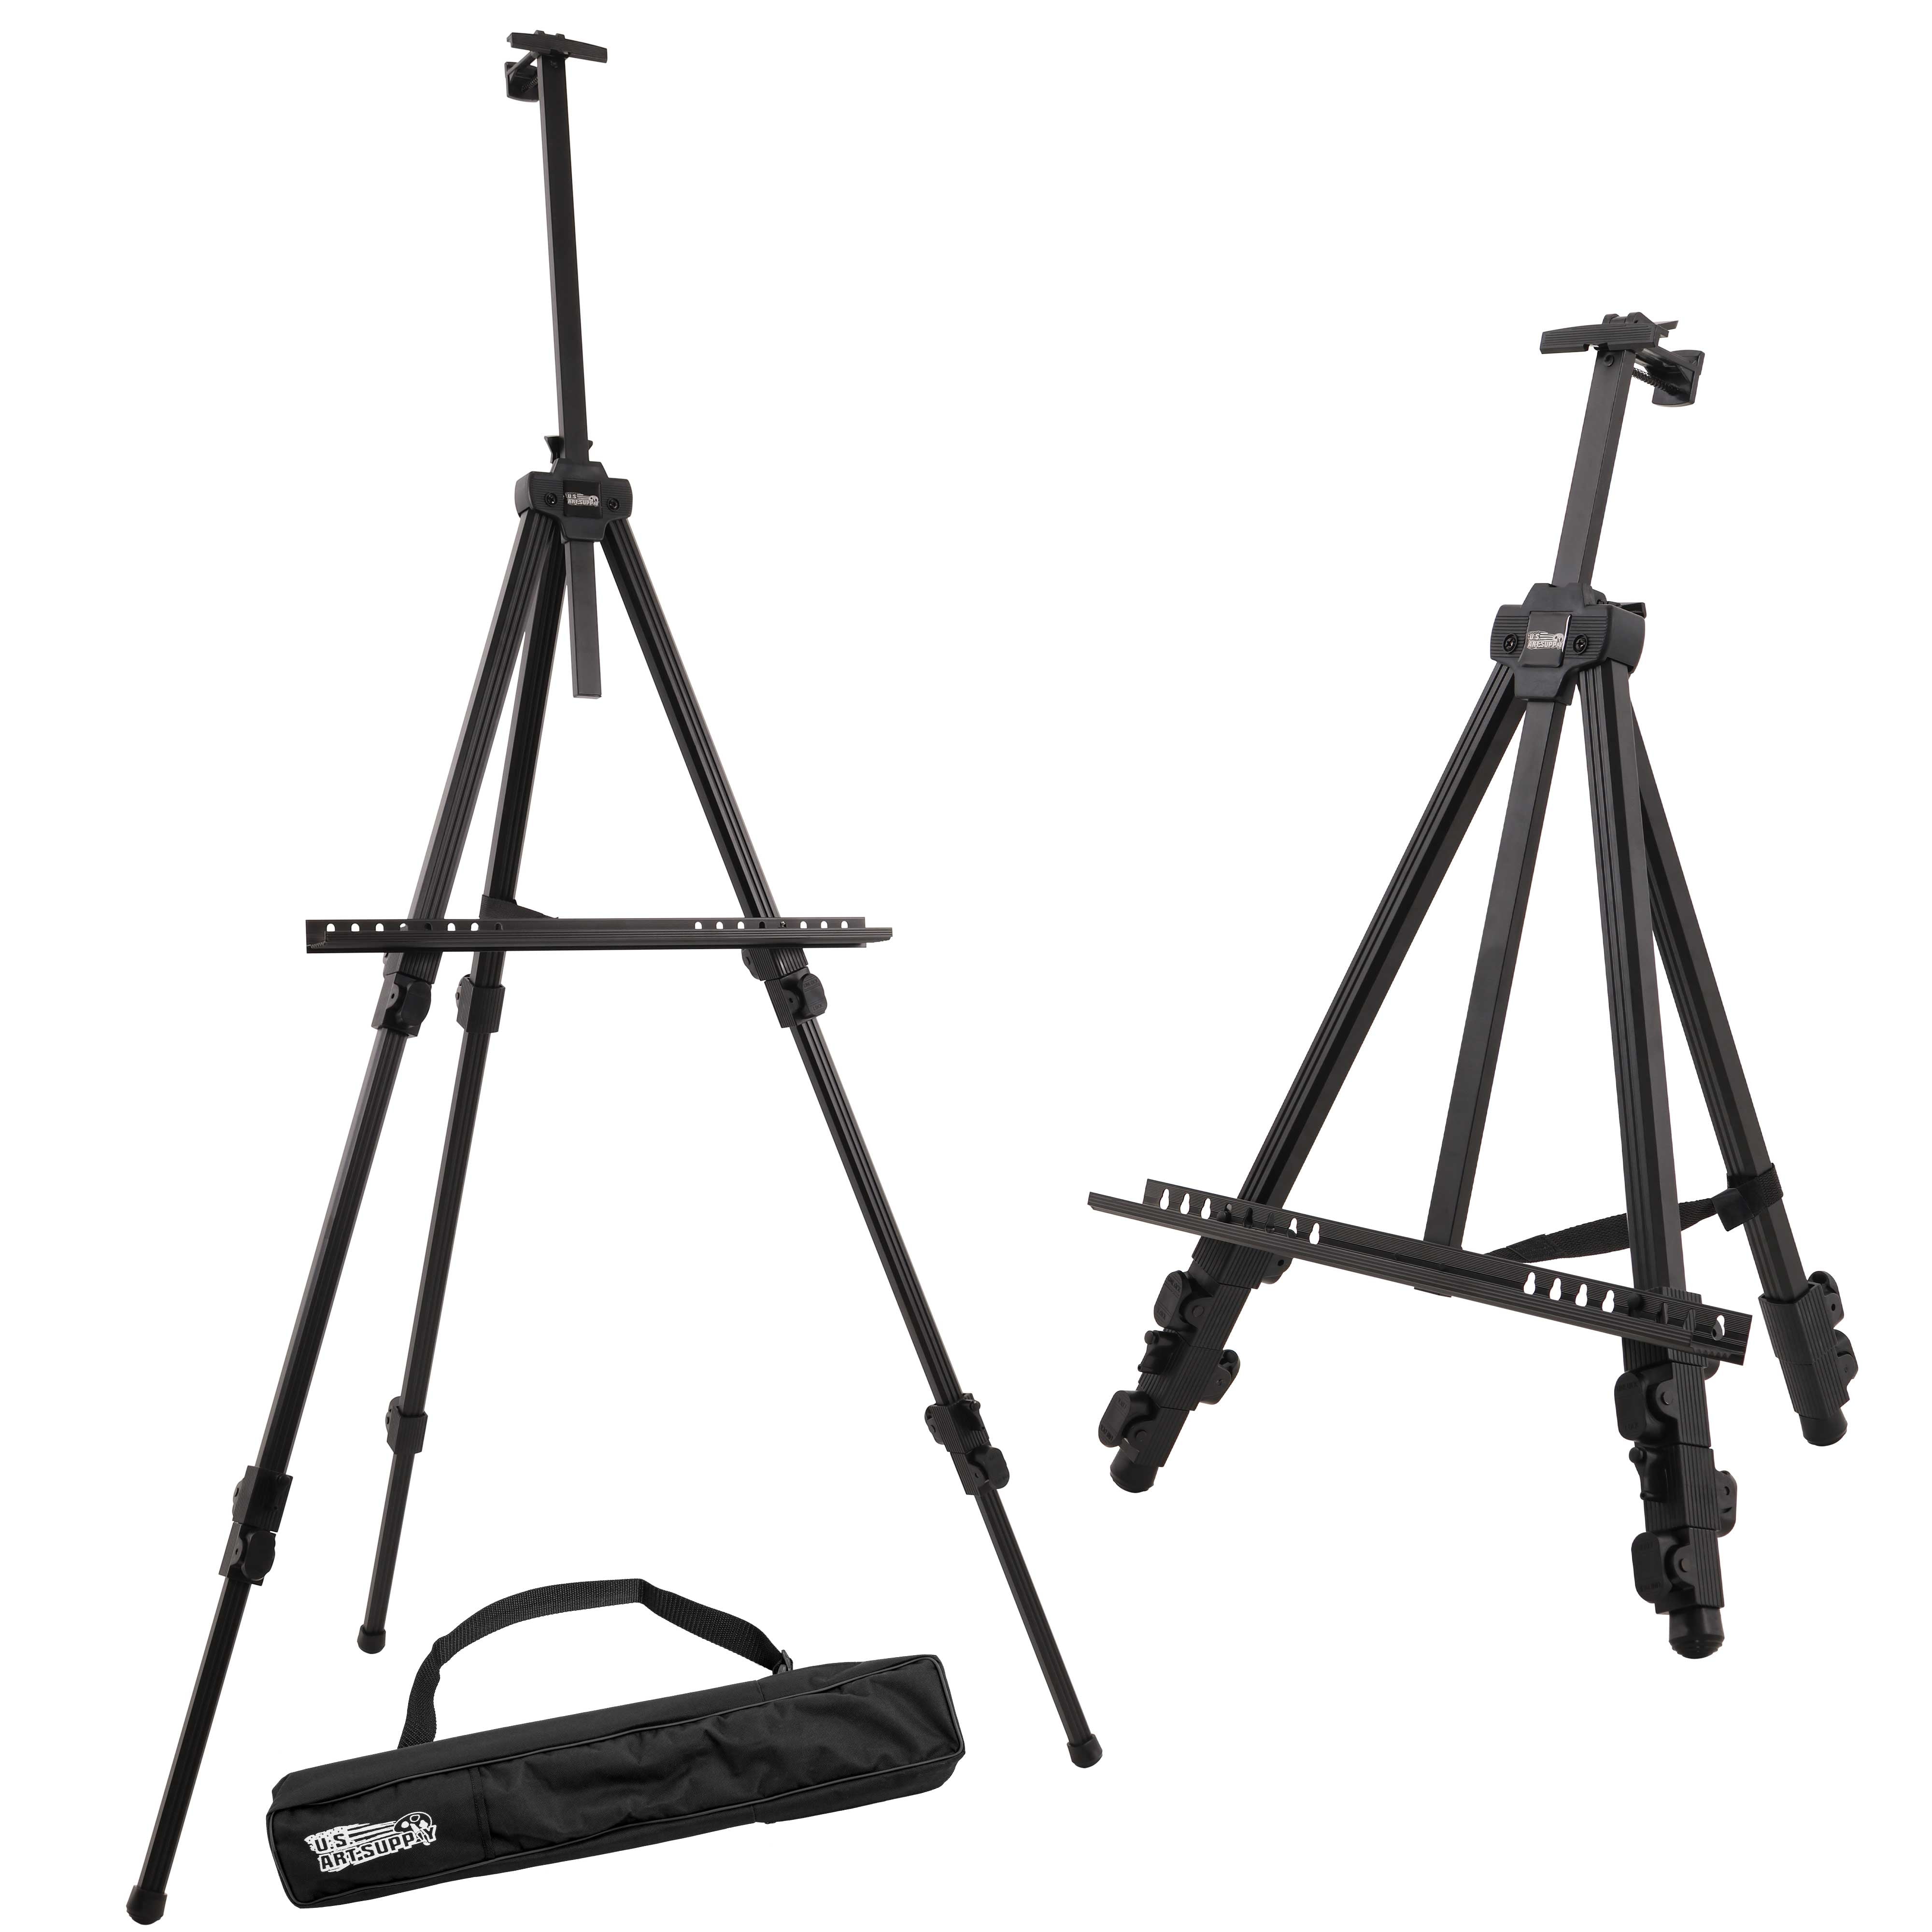 Ohuhu 72 Artist Easels for Display Black Art Easels W/Adjustable Height 25-72” Aluminum Metal Tripod Field Easel with Bag for Table-Top/Floor/Flip Charts 4 Pack Easel Stand 